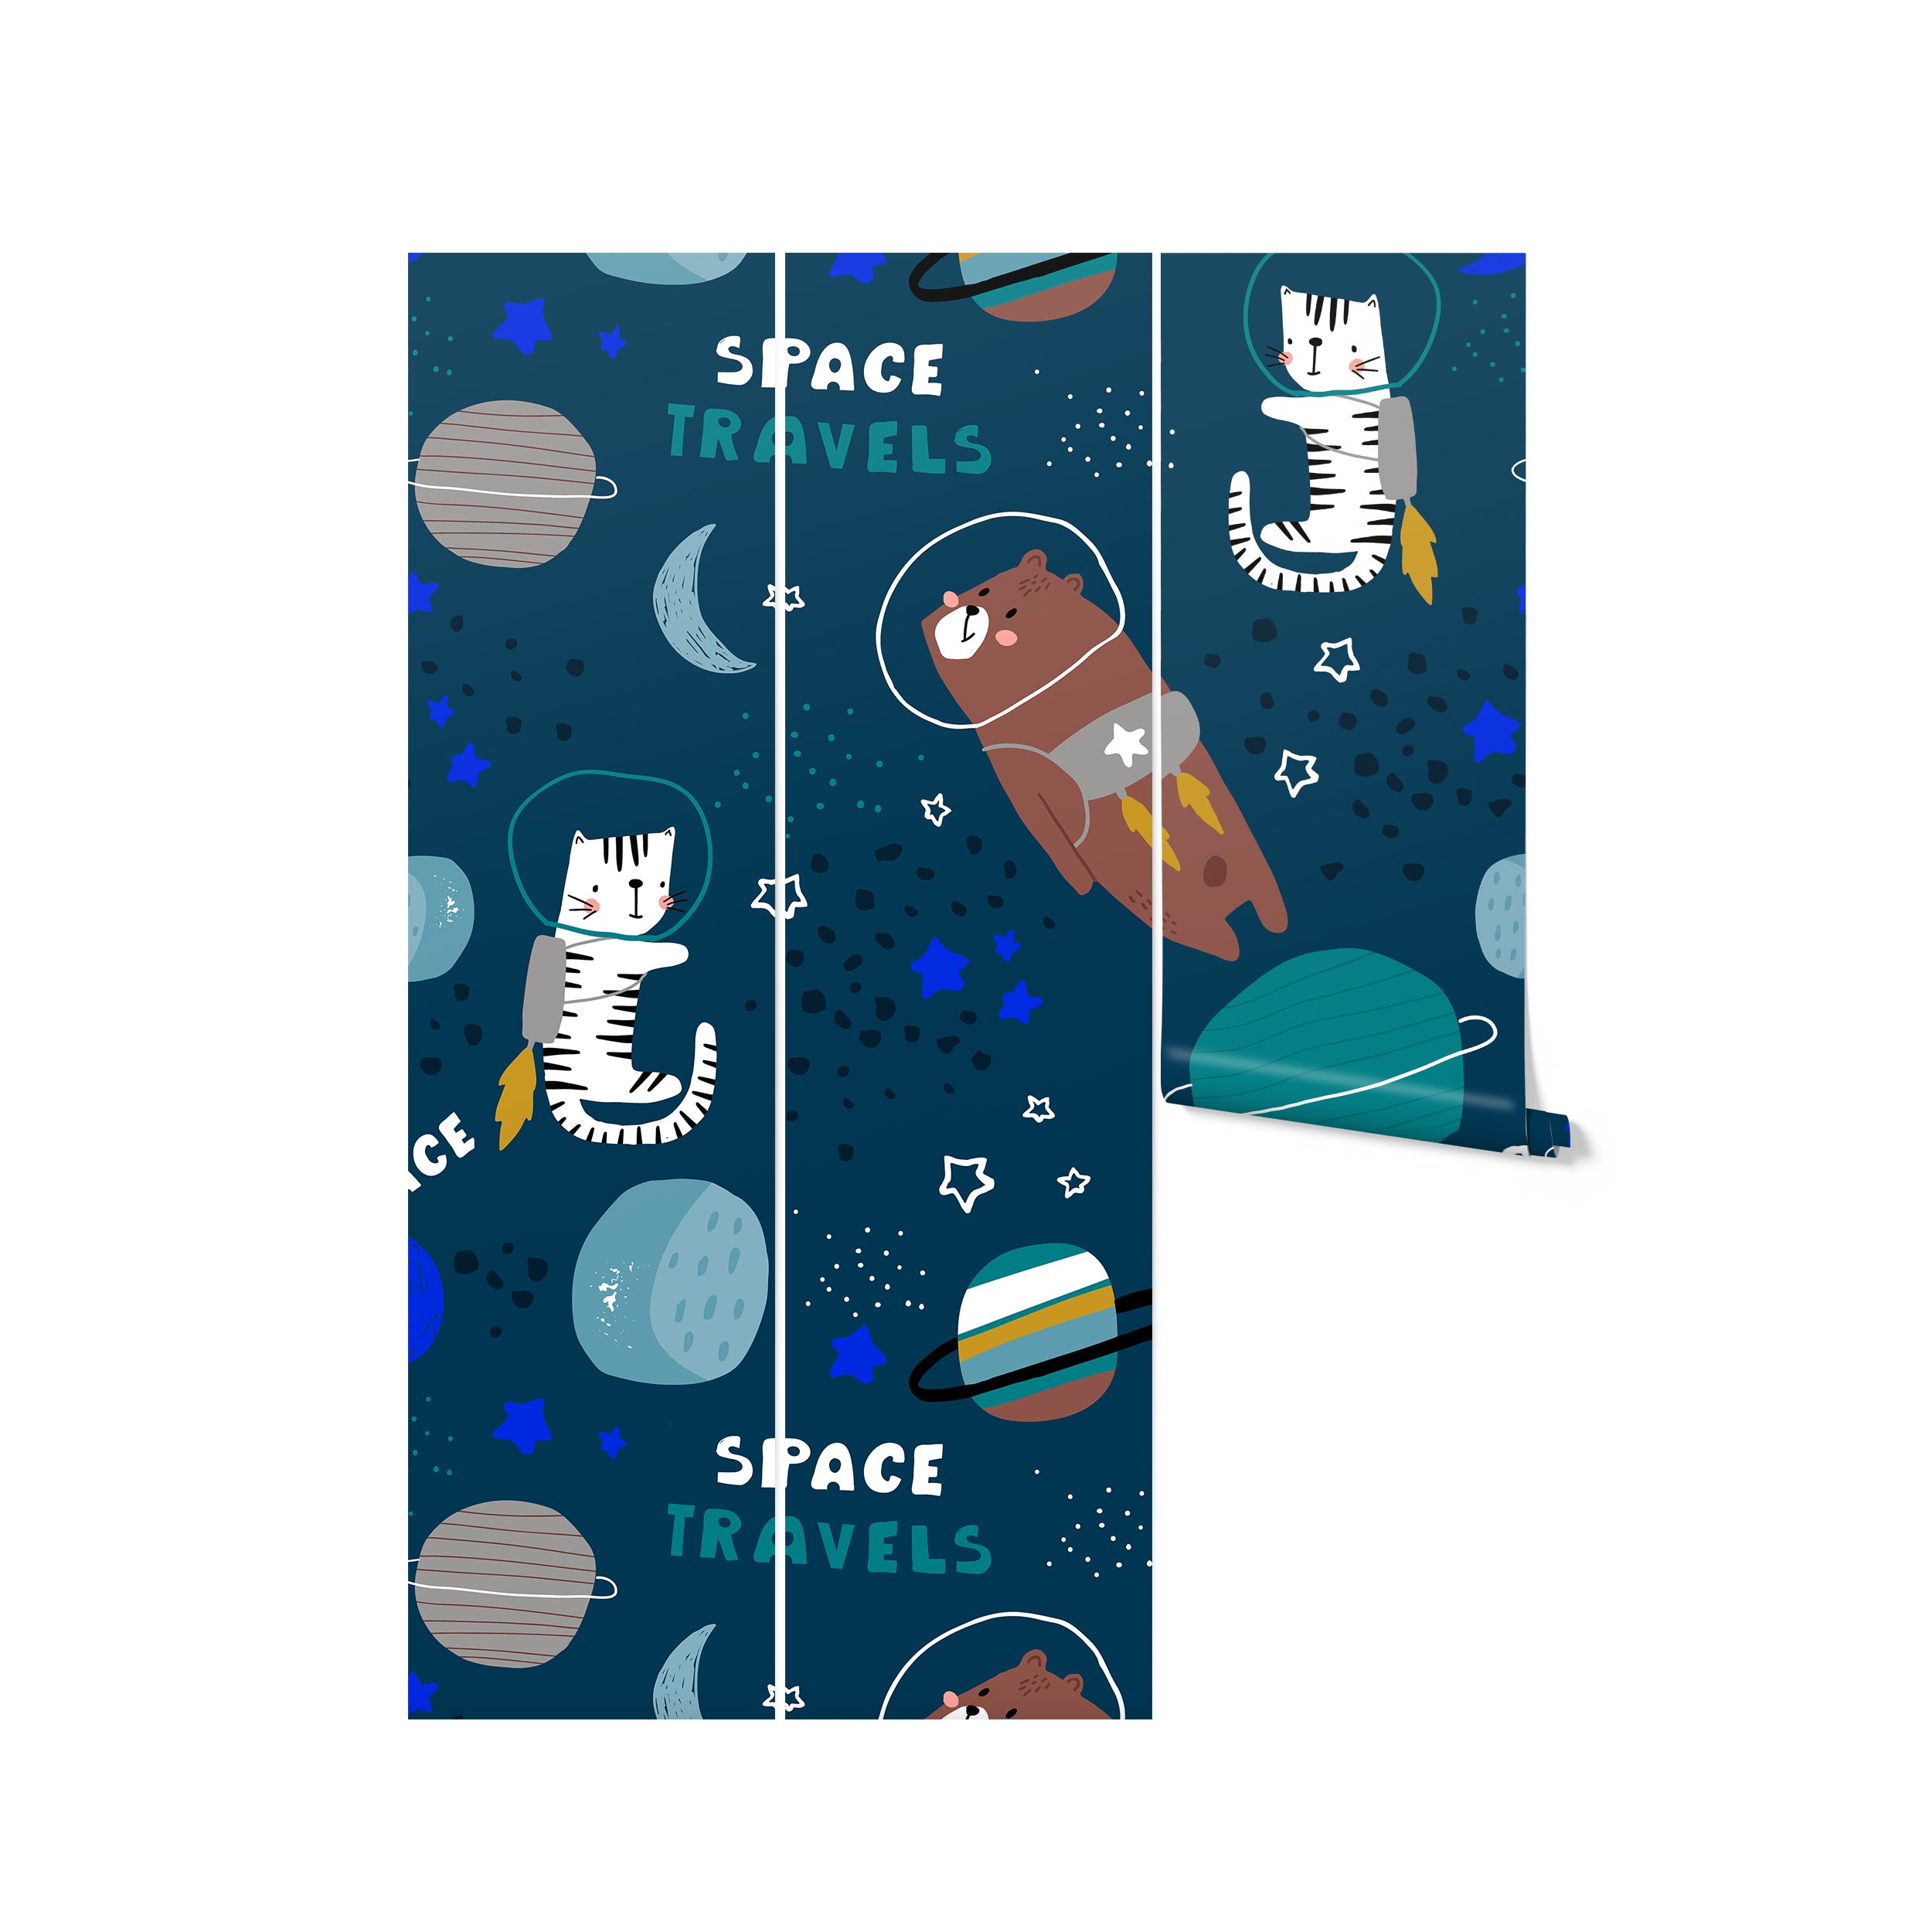 A close-up view of the children's wallpaper roll showcasing the pattern of cute astronaut animals, planets, and stars. The deep blue background and playful design elements make it perfect for creating a whimsical space-themed room.